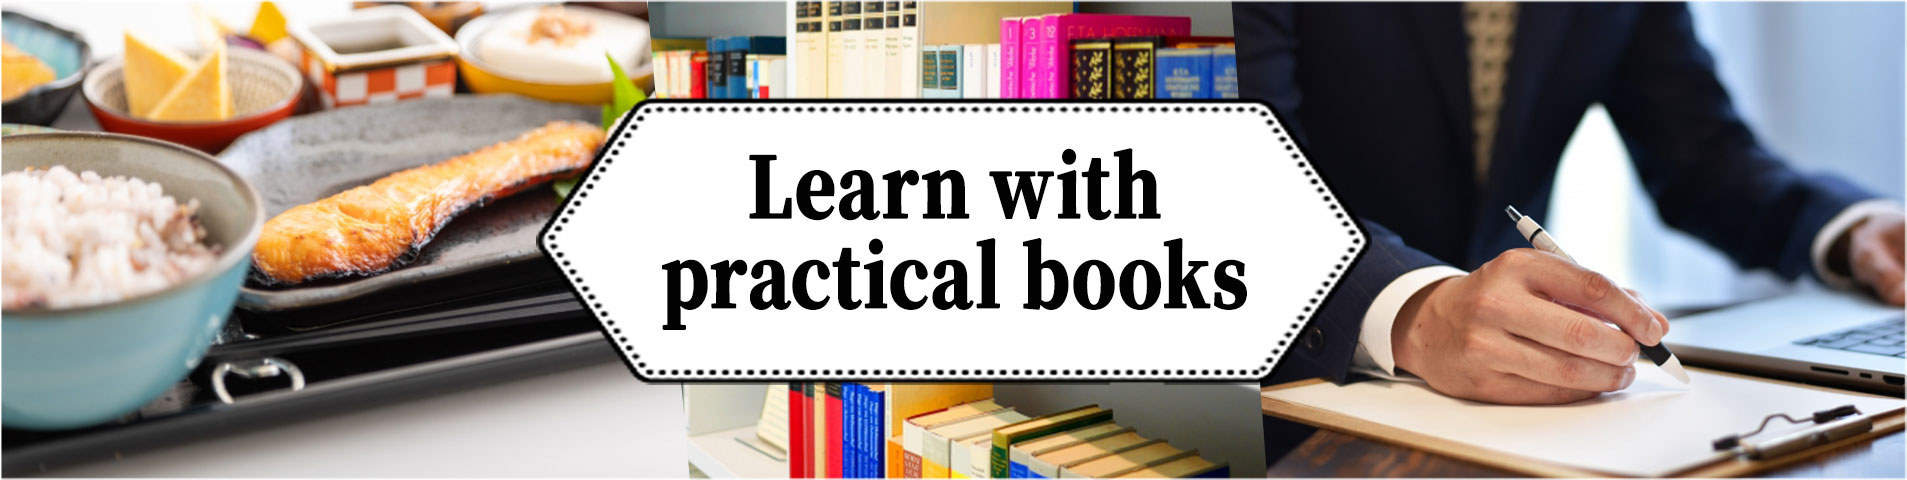 Learn with practical books